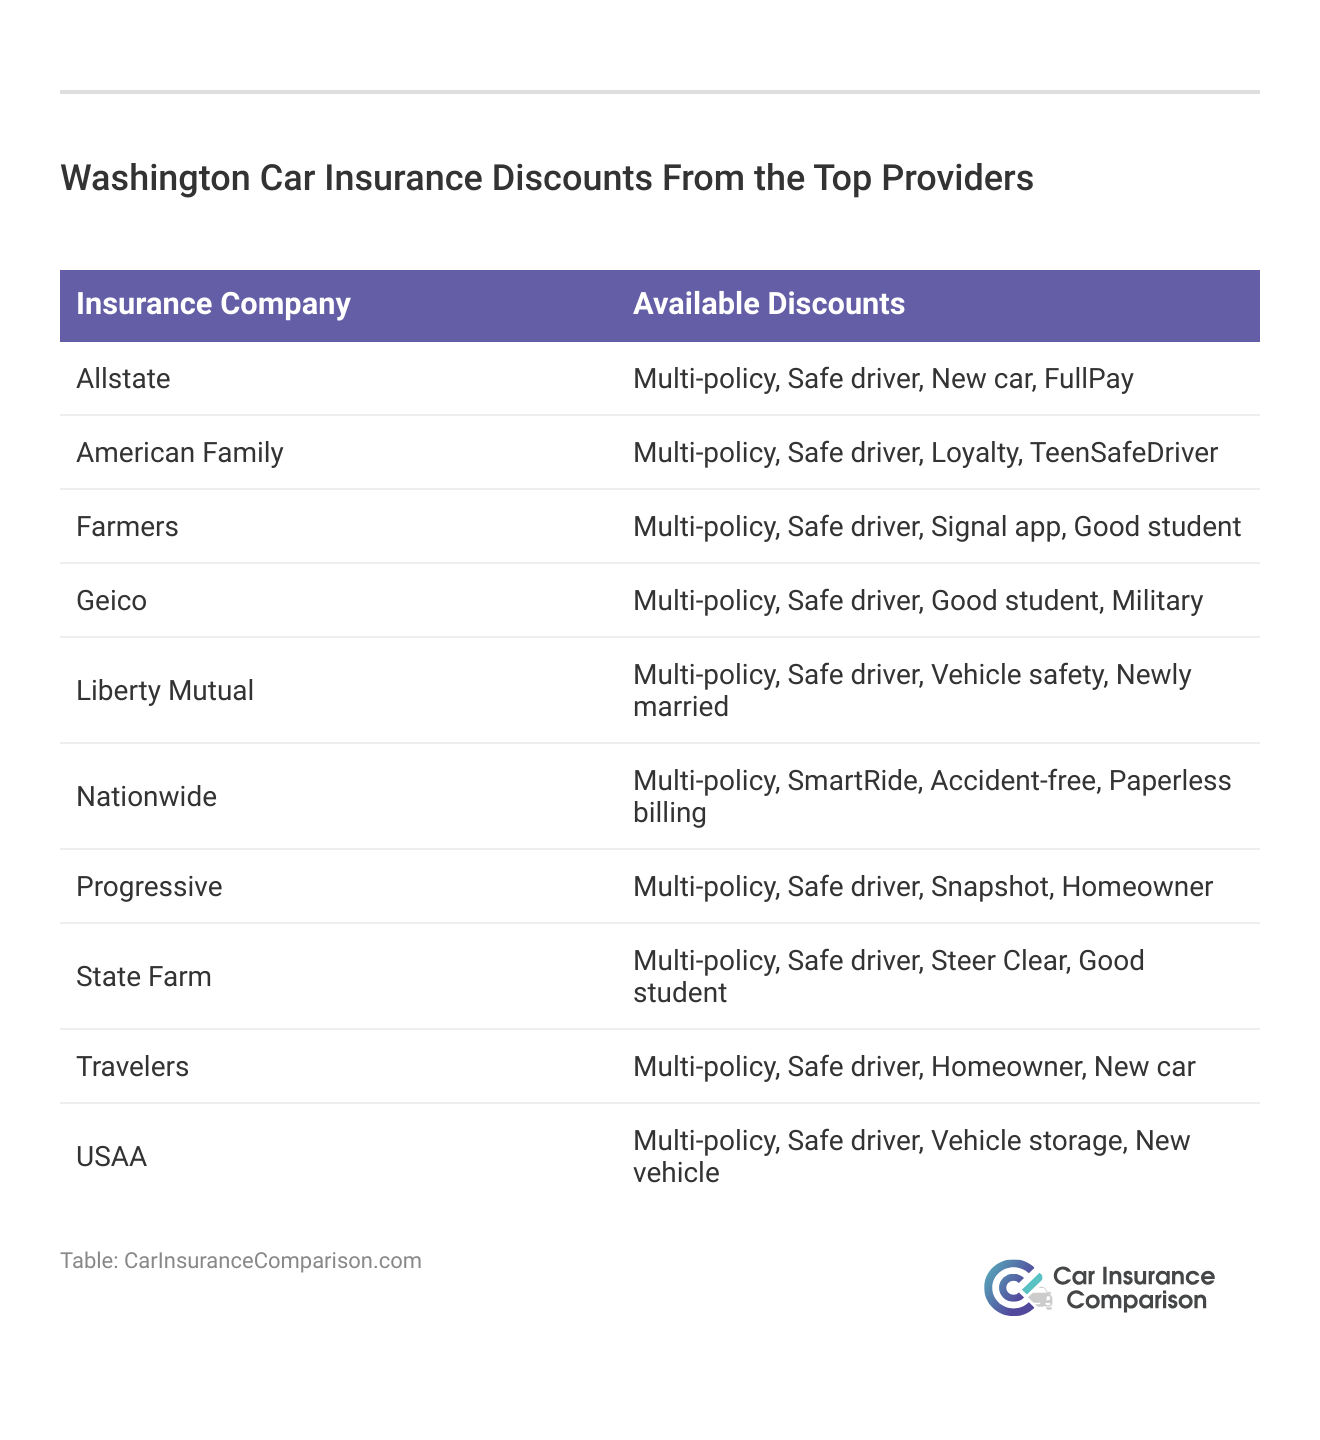 <h3>Washington Car Insurance Discounts From the Top Providers</h3>